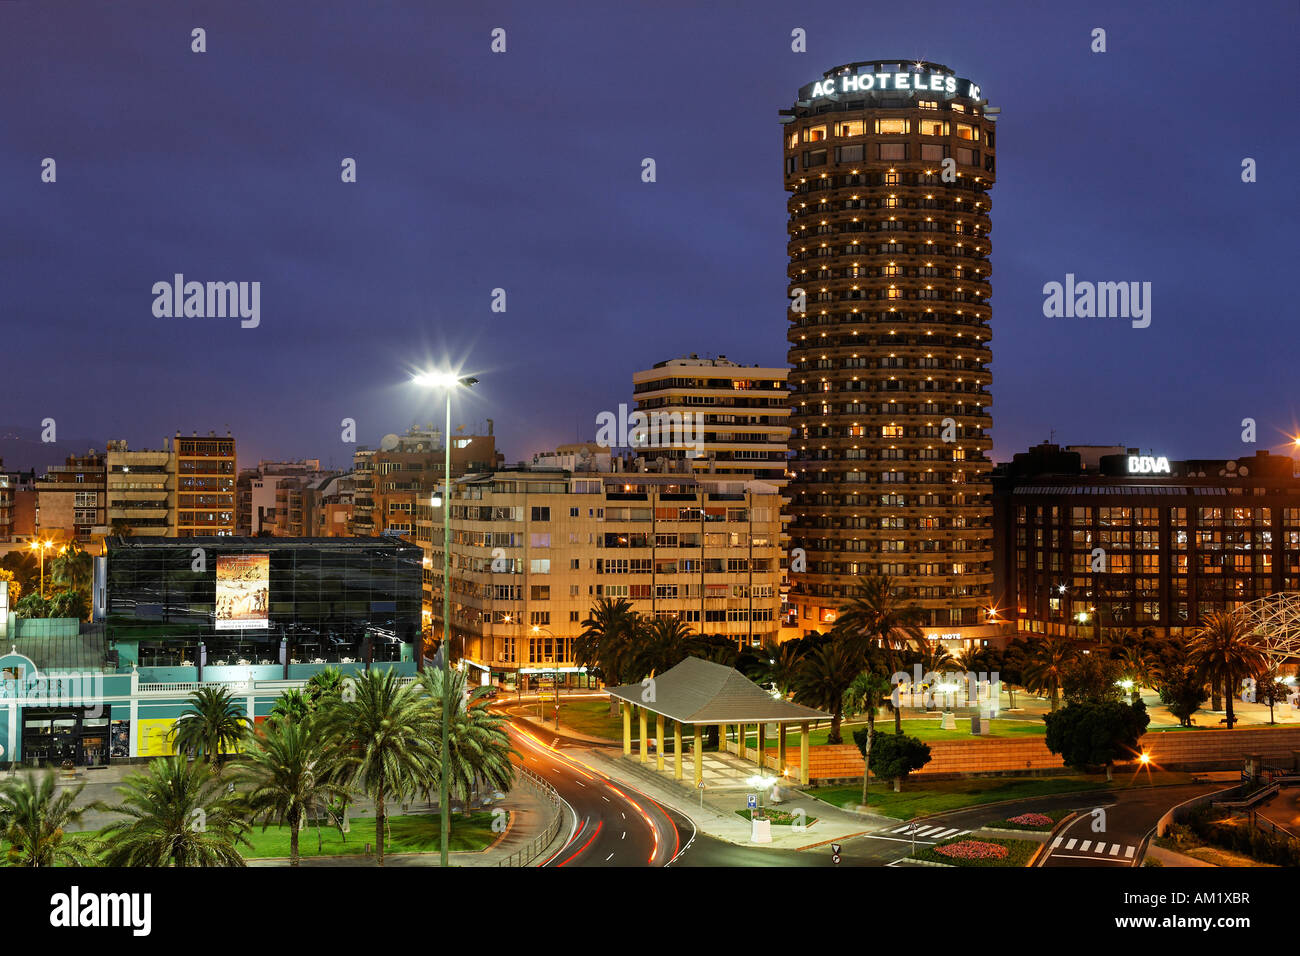 Ac Hotel High Resolution Stock Photography and Images - Alamy